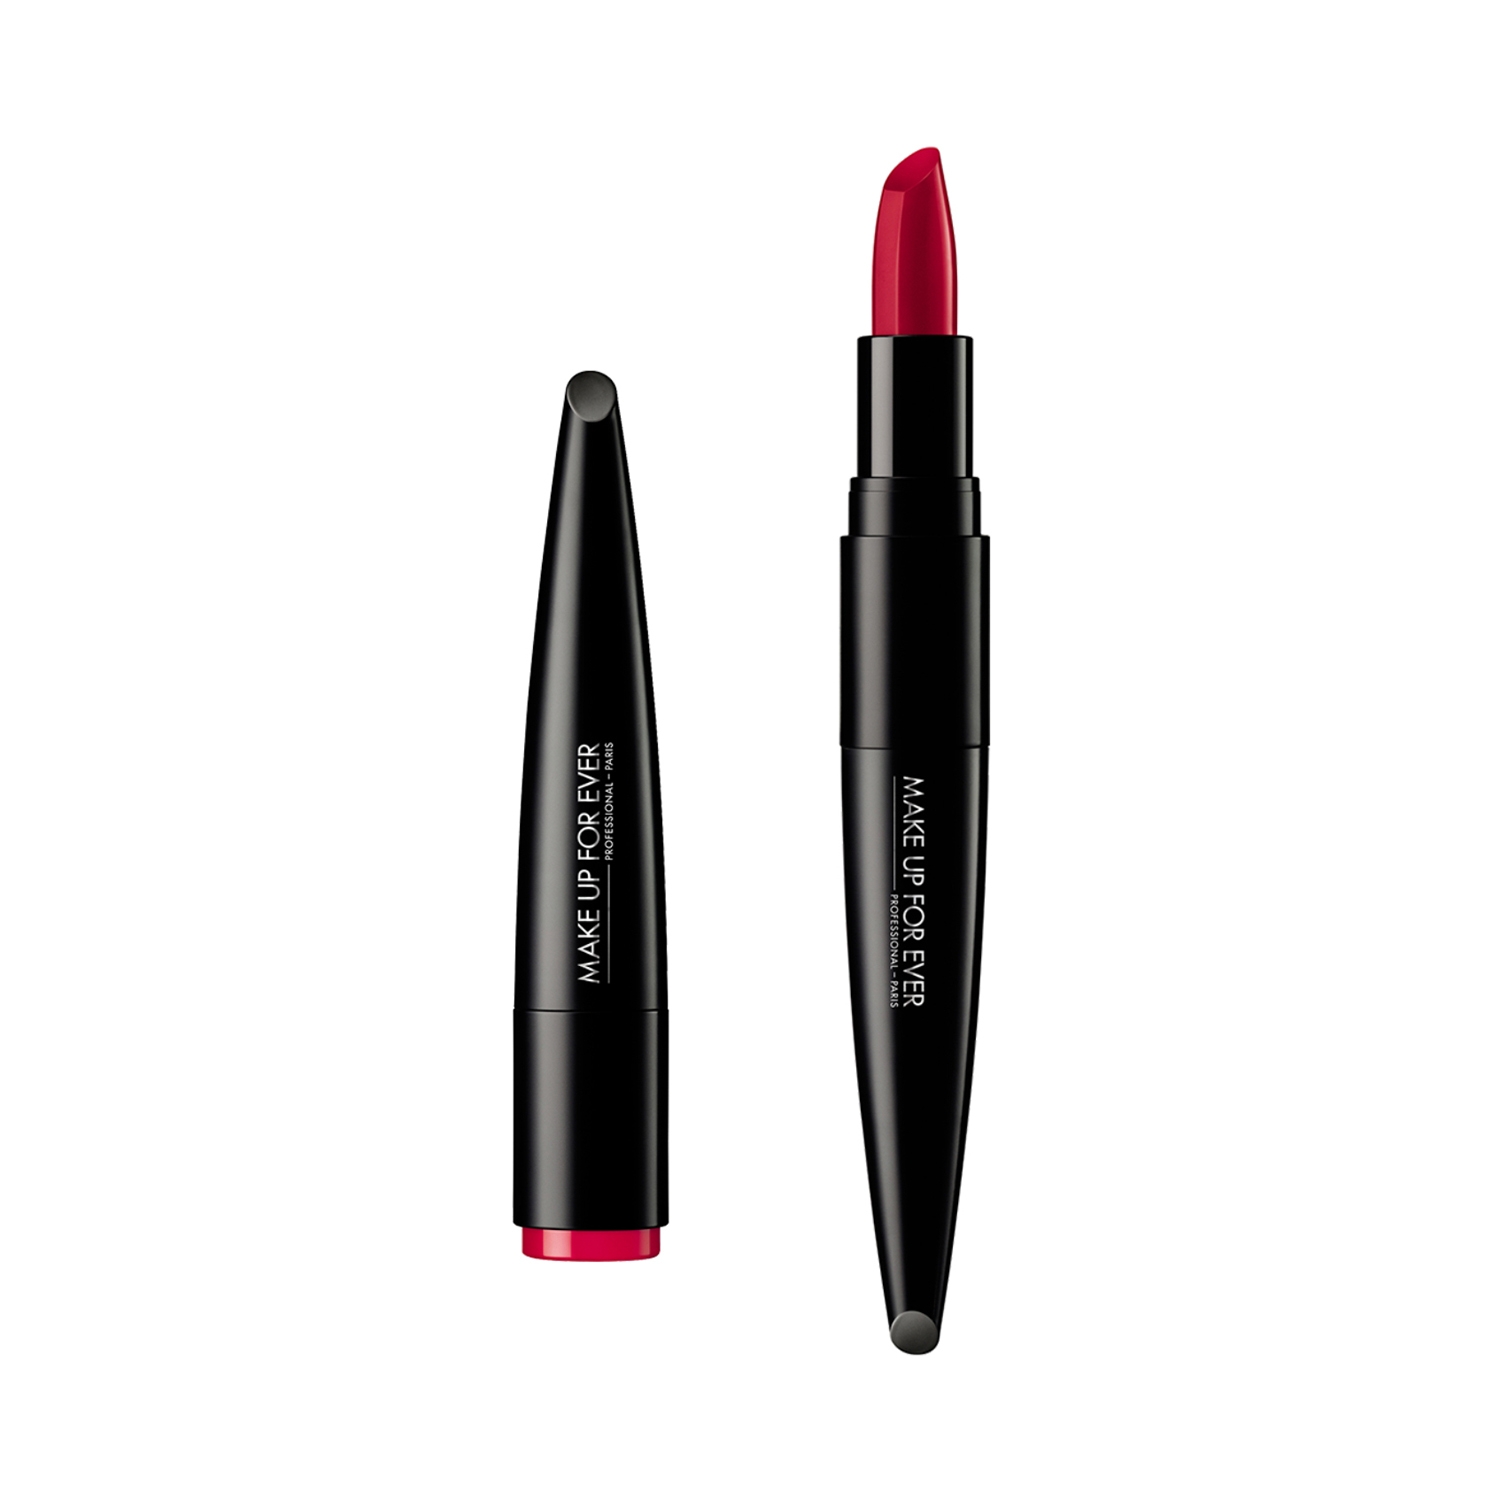 Make Up For Ever | Make Up For Ever Rouge Artist-intense Color Beautifying Lipstick - Cherry Muse 406 (3.2g)